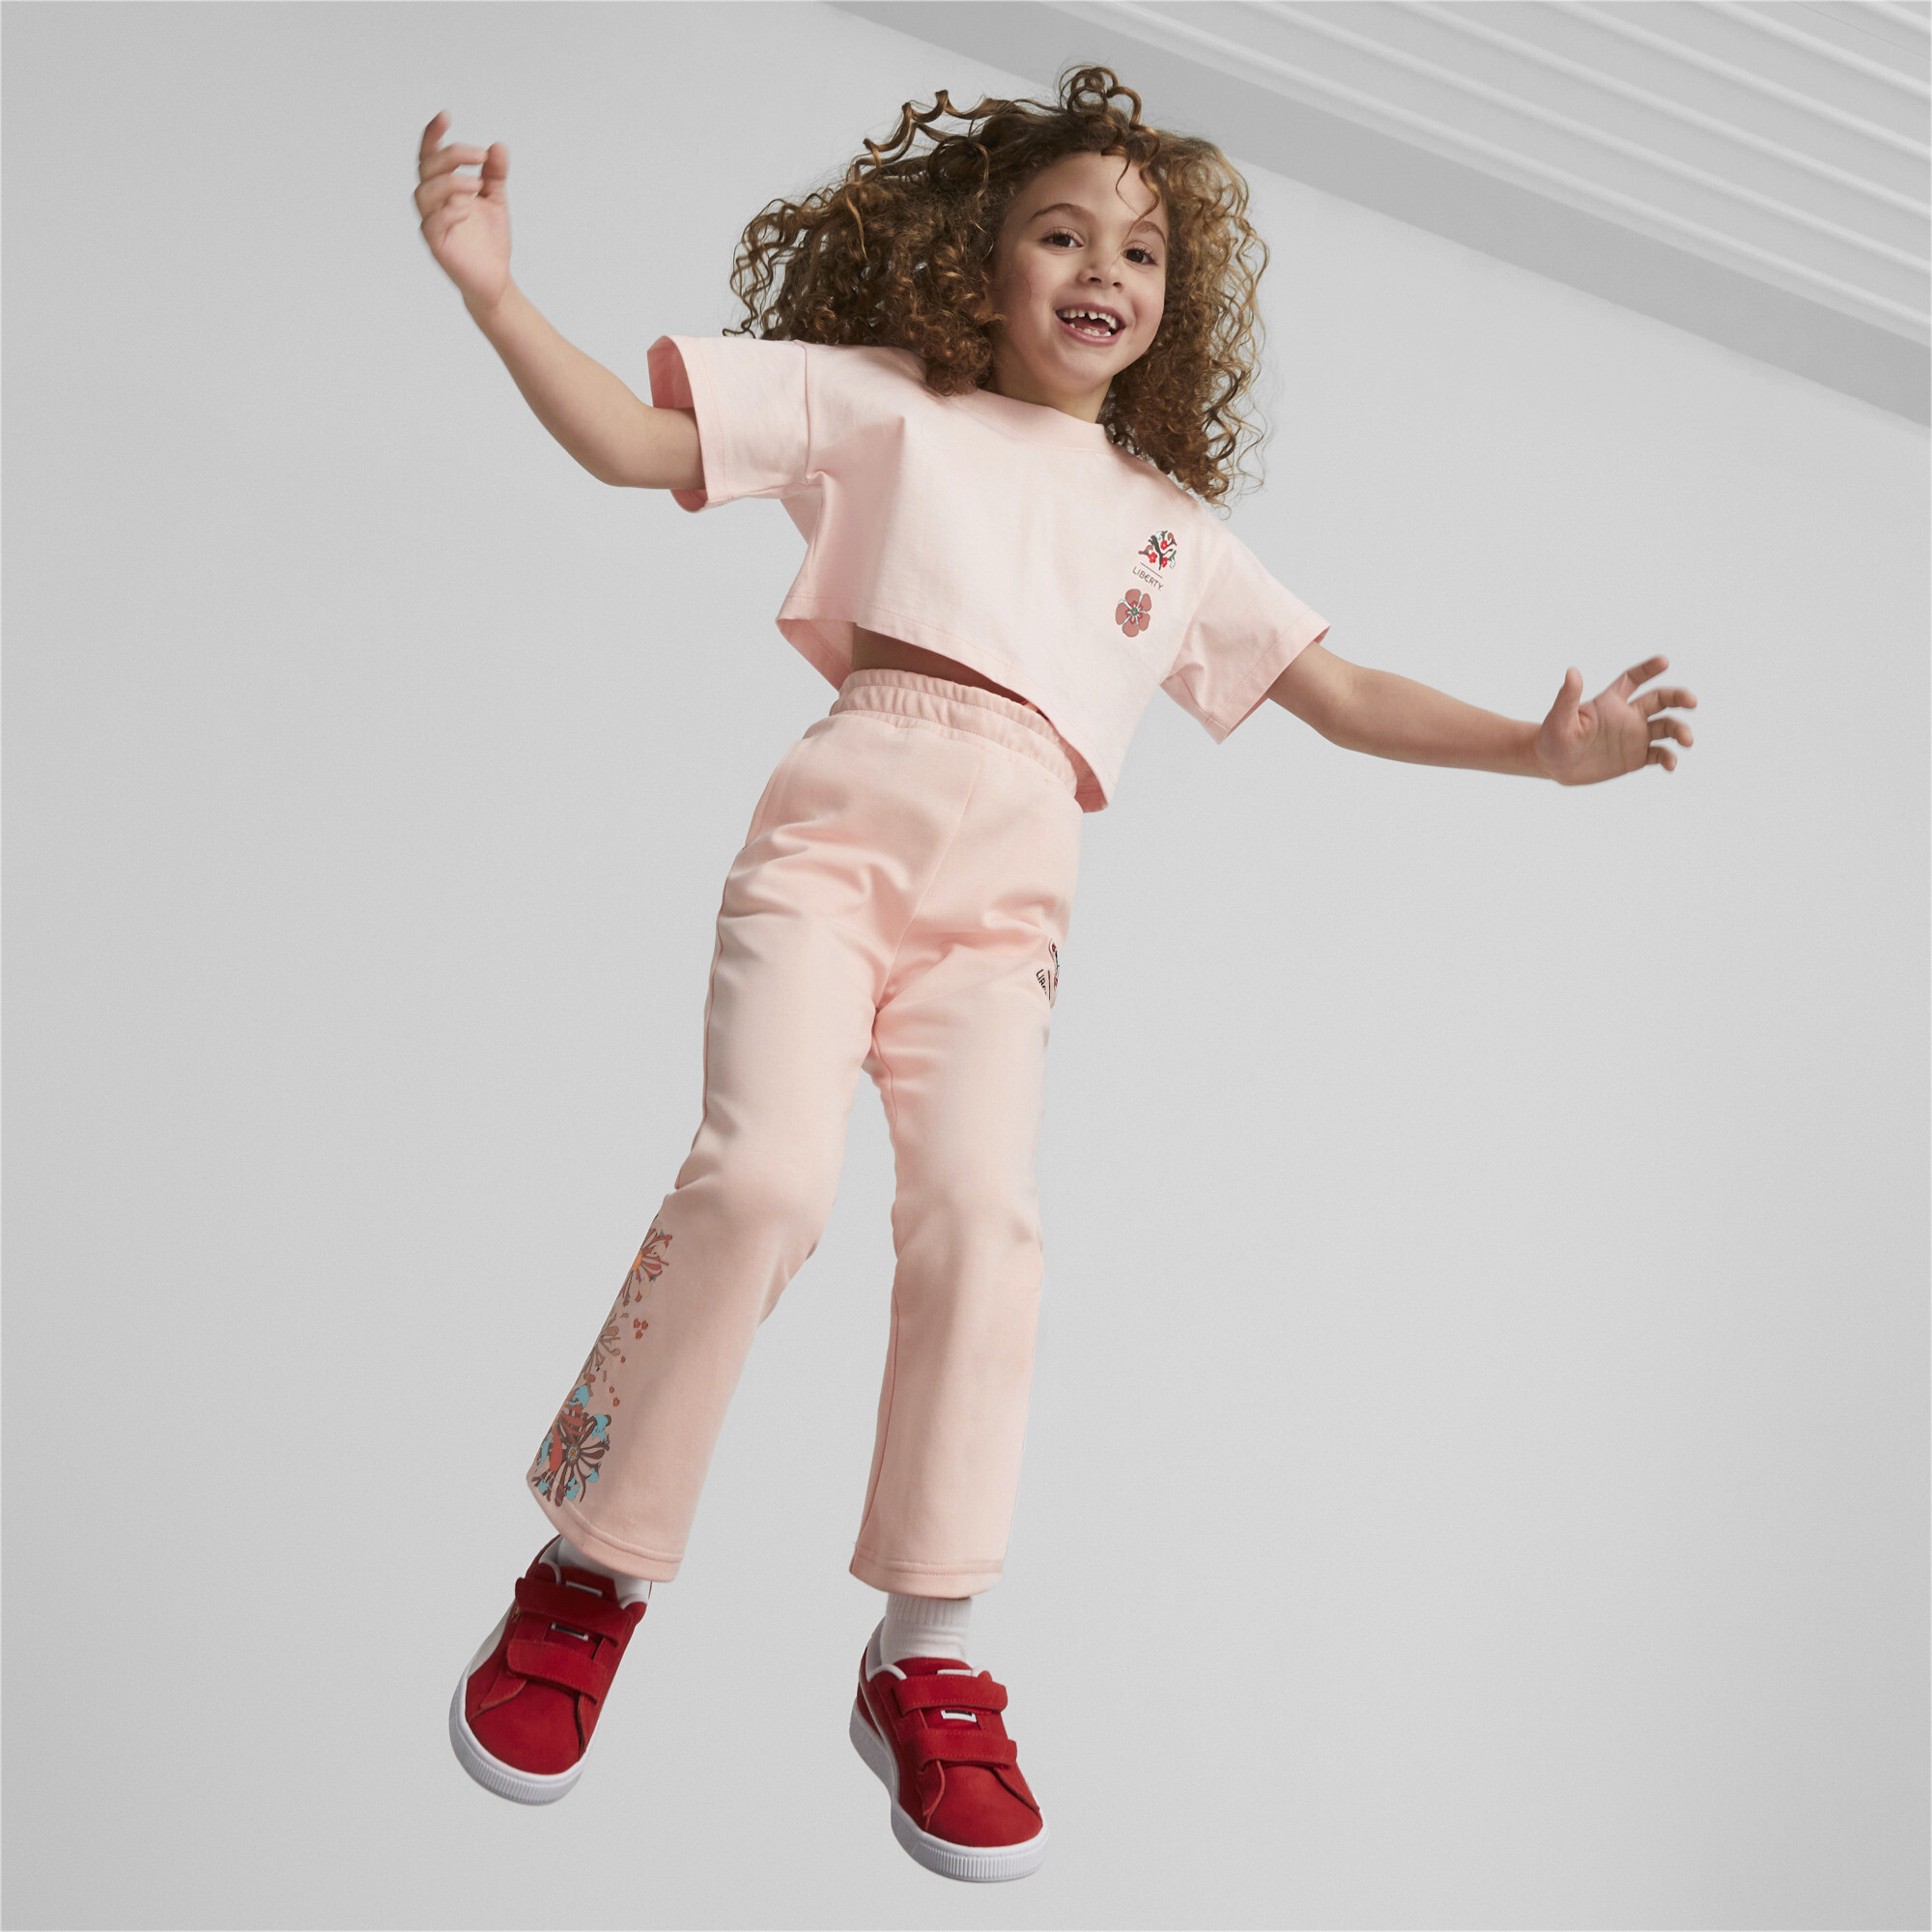 PUMA X LIBERTY Flared Pants Kids In Pink, Size 7-8 Youth